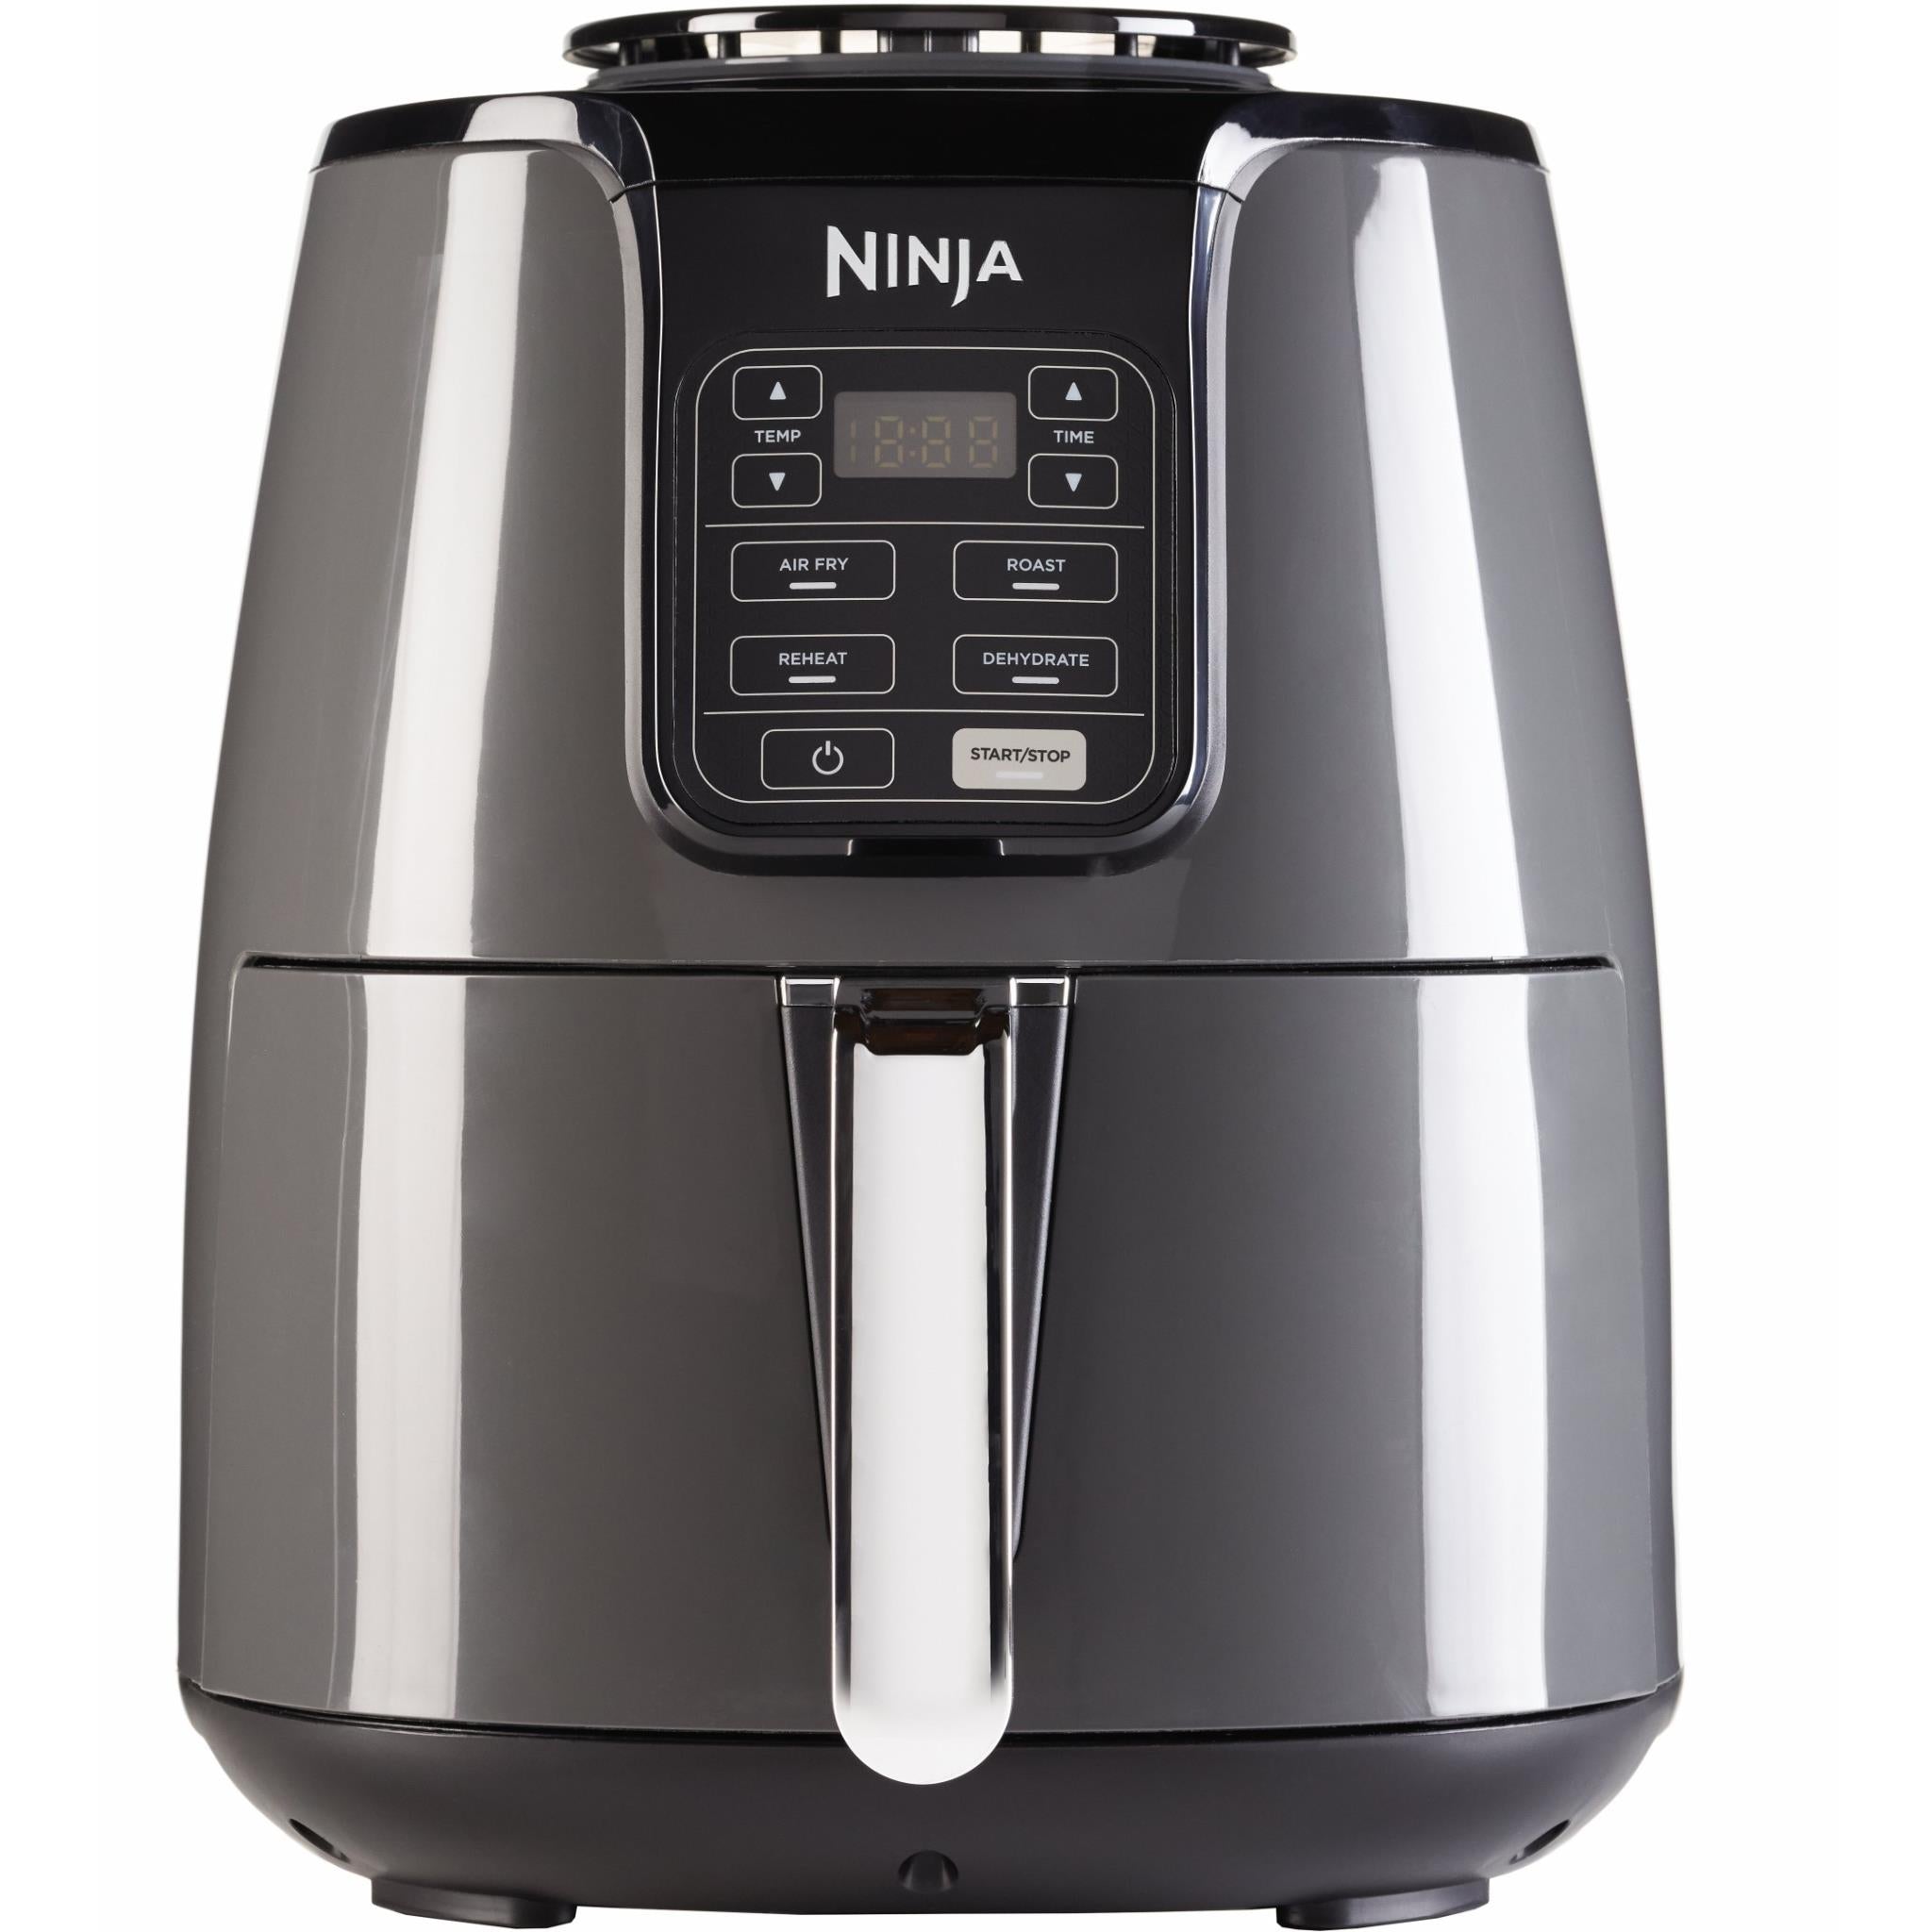 Ninja Foodi Sp101 Ft102co Digital Fry Convection Oven Toaster Air Fryer Flip Away For Storage With Xl